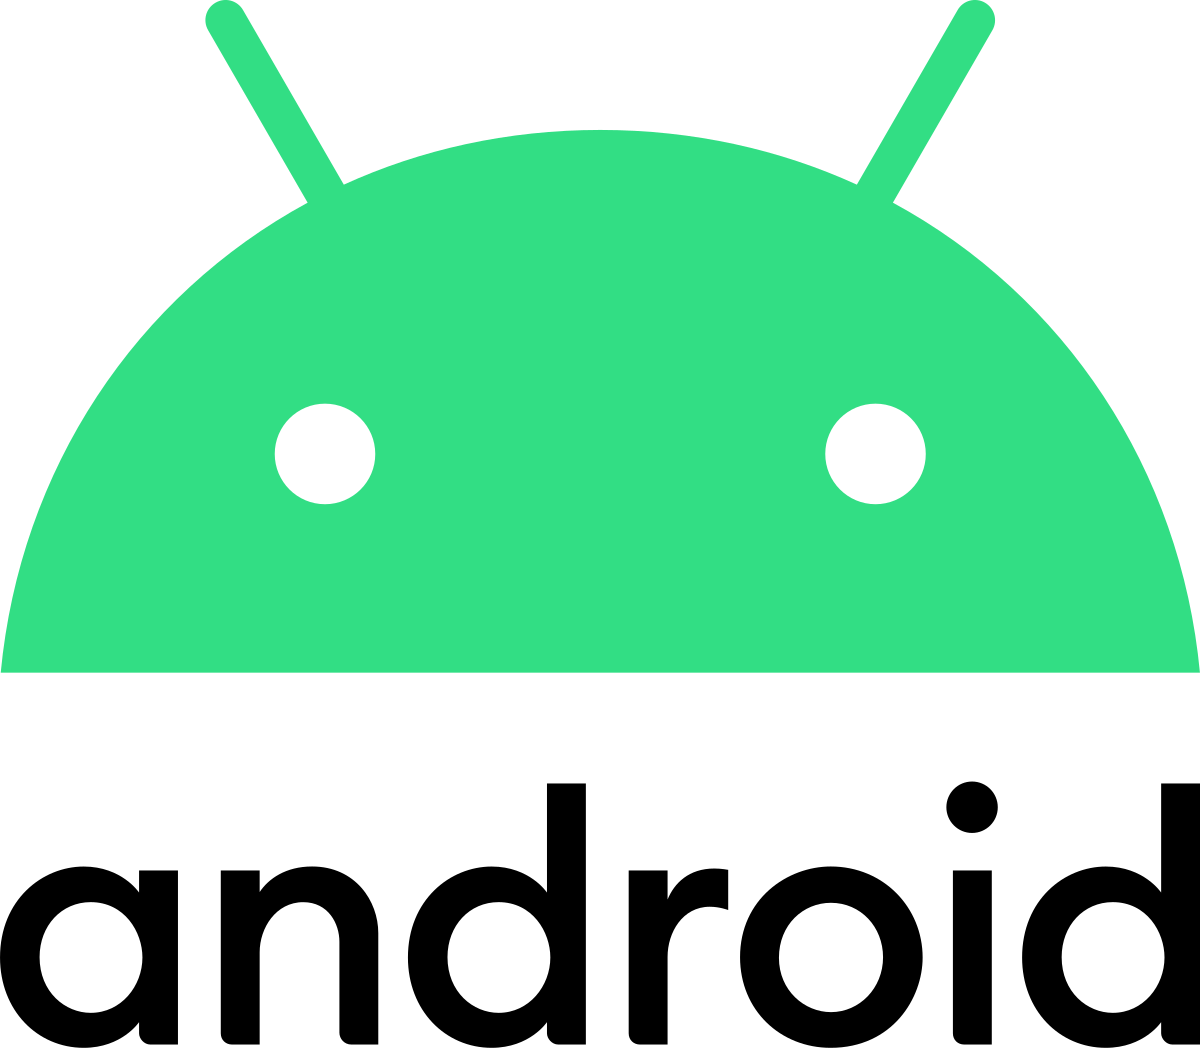 How to Use Hotspot on Android?